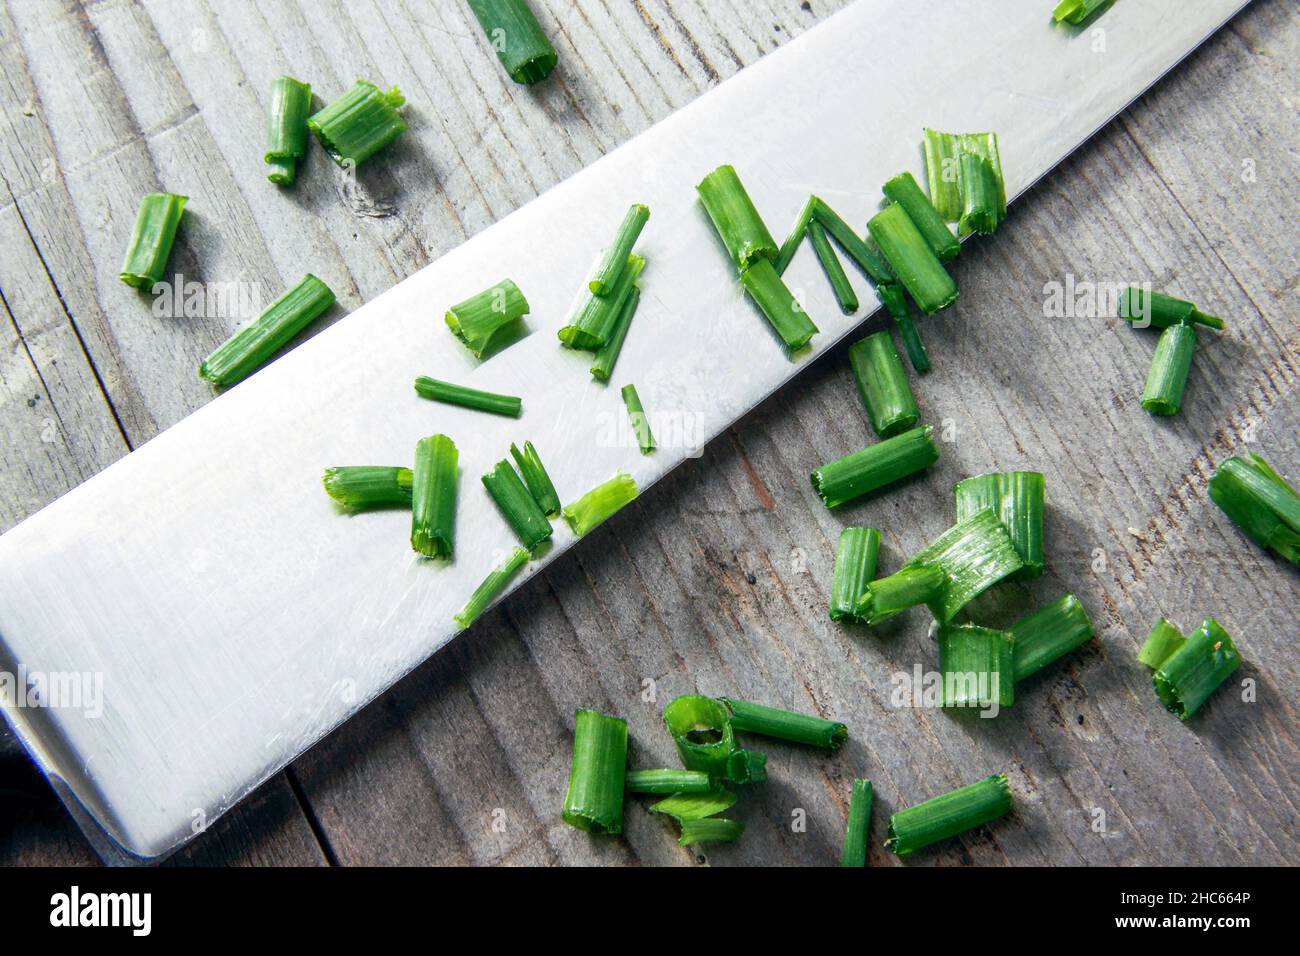 Kitchen knife with sliced leek on wooden background Stock Photo